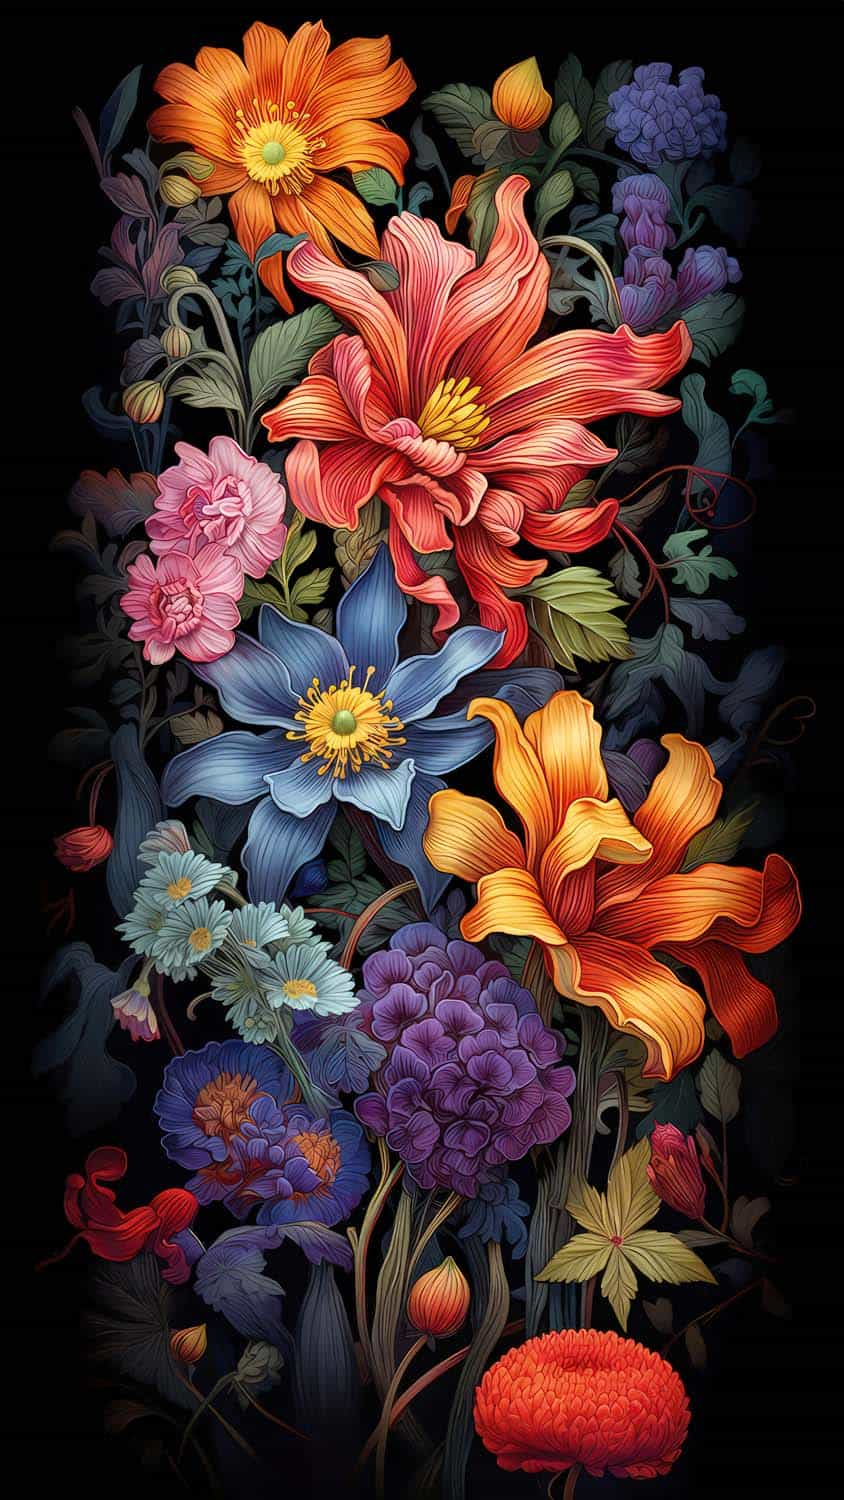 Colorful Flowers IPhone Wallpaper 4K  IPhone Wallpapers